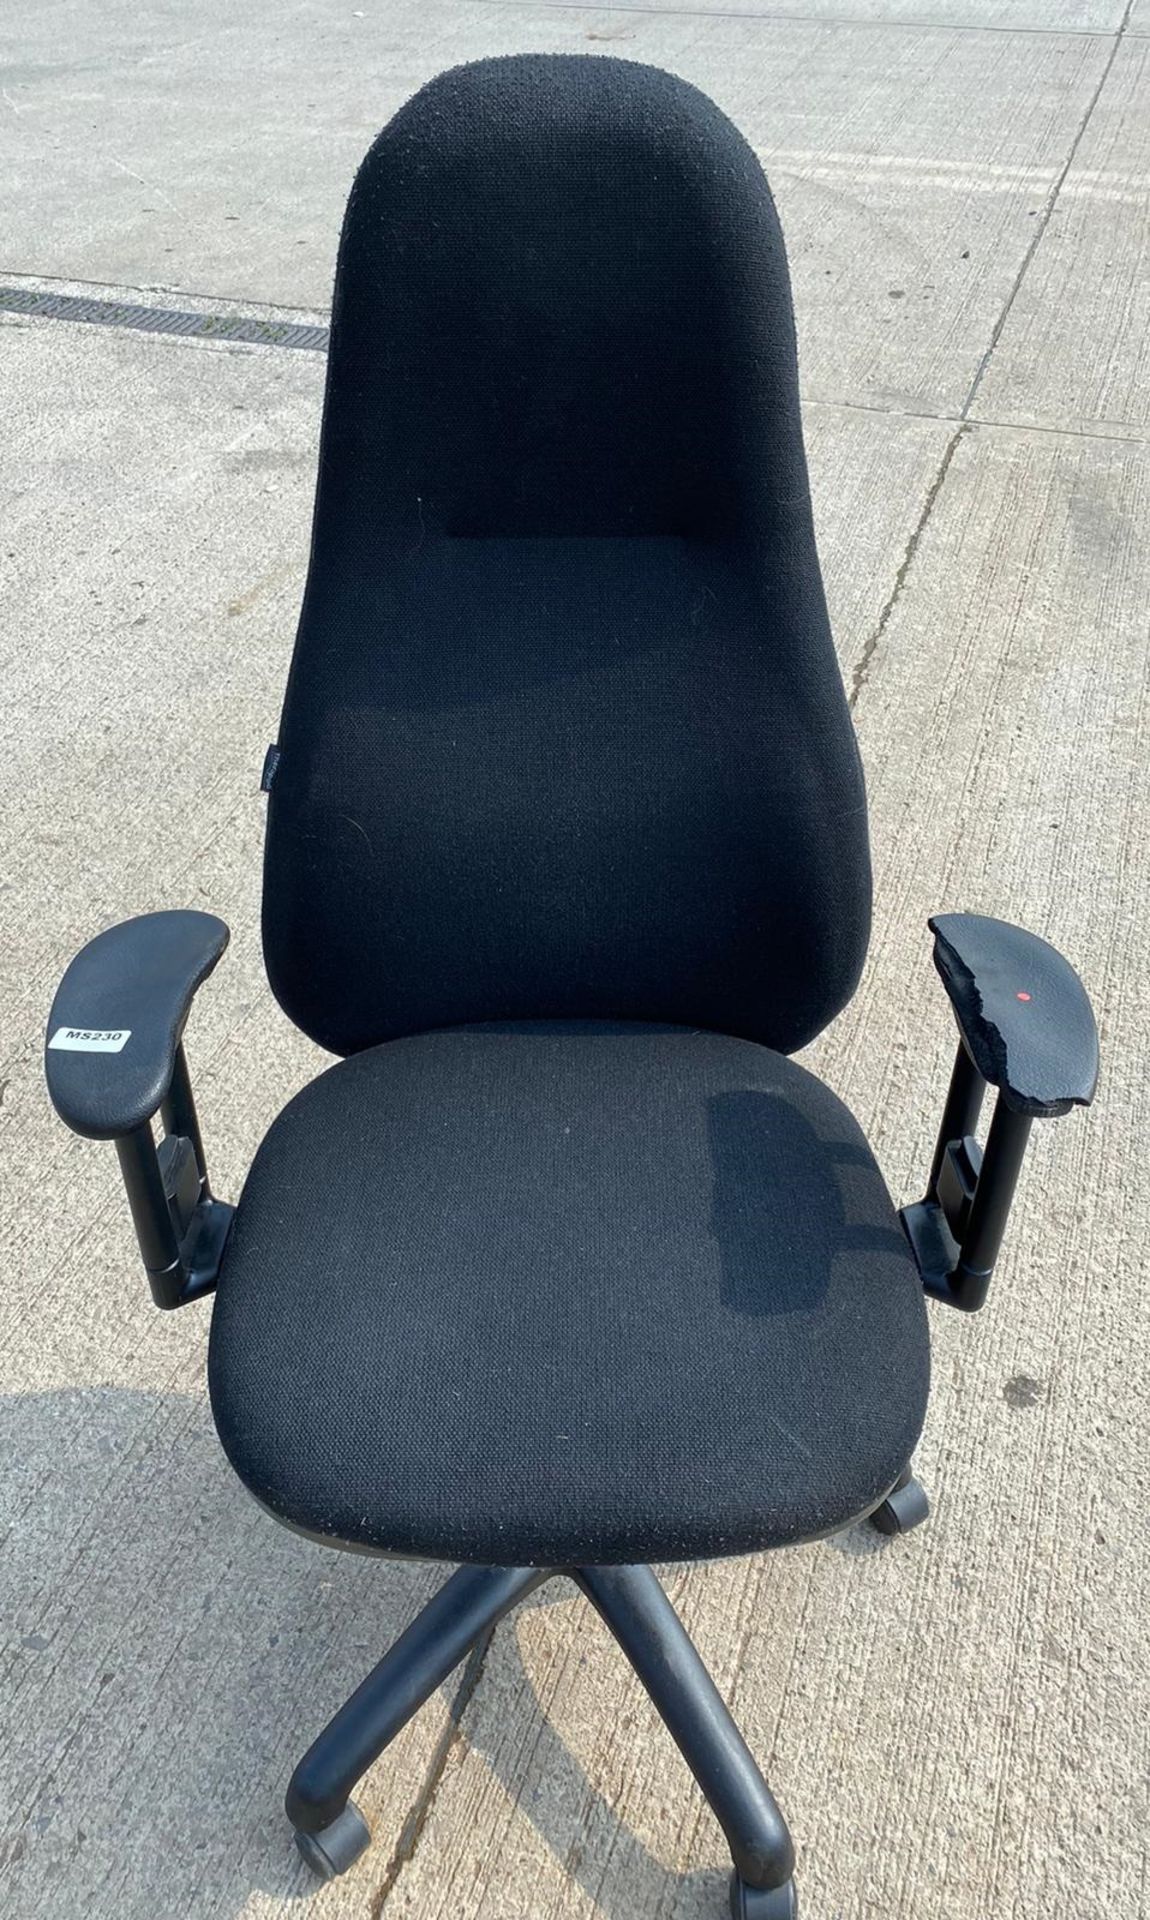 1 x Therapod Classic Synchro High Back Chair with Arms - Used Condition - Location: Altrincham WA14 - Image 5 of 12